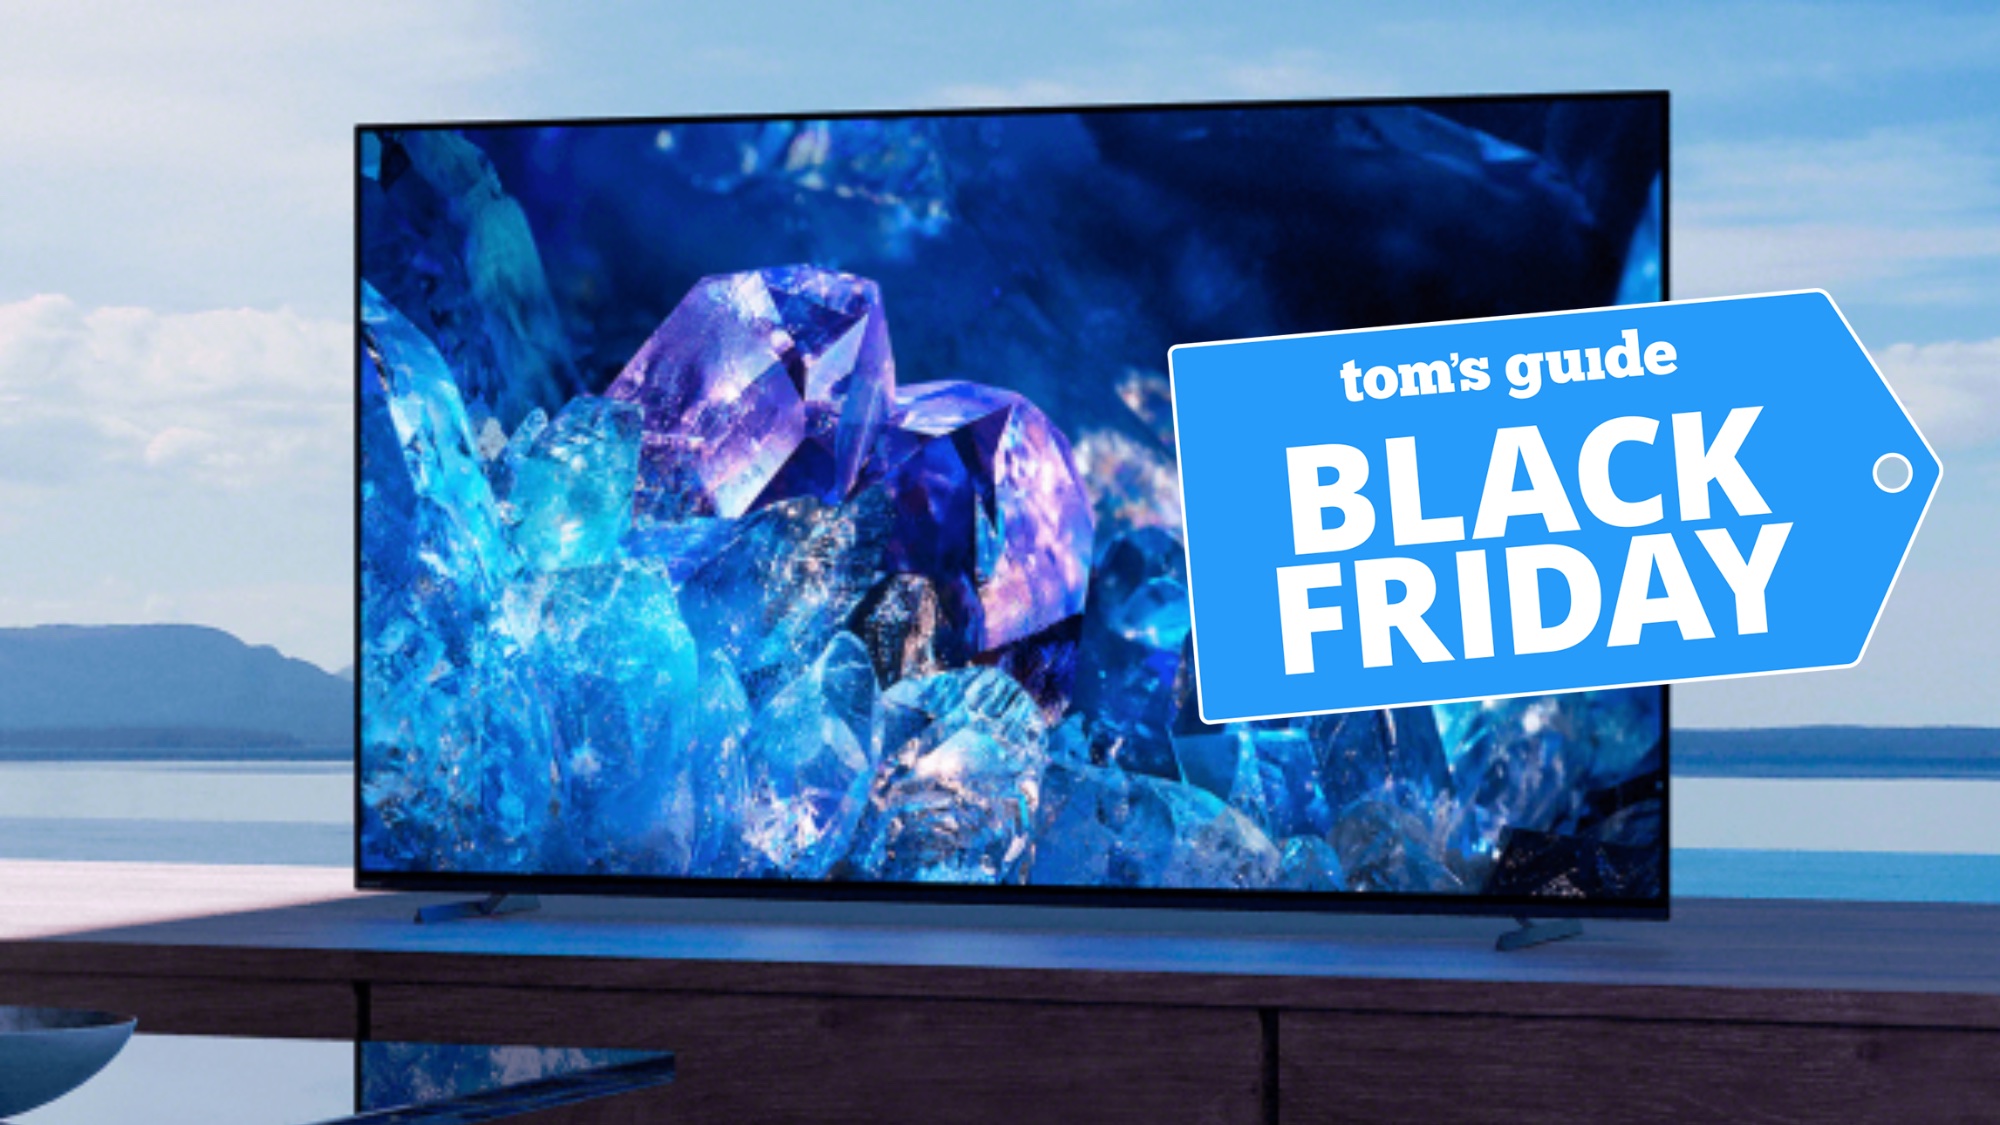 Image of Sony Bravia XR A80K OLED TV with Black Friday deal tag